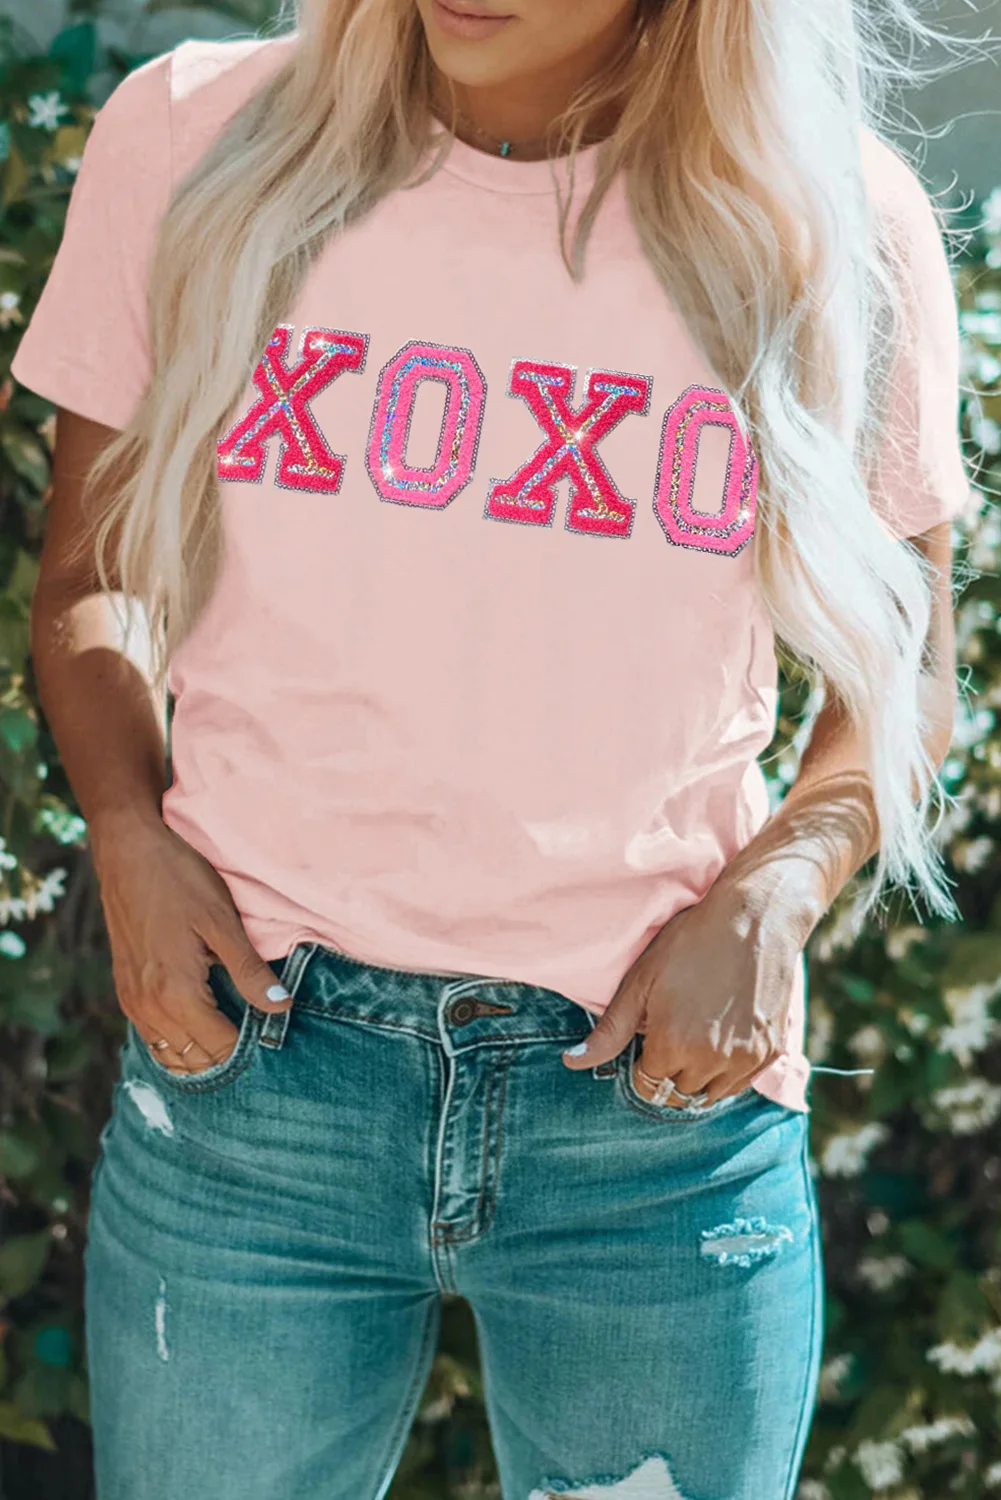 Dear-Lover Pink Valentines Shiny Xoxo Graphic Oversized T-Shirt For Women